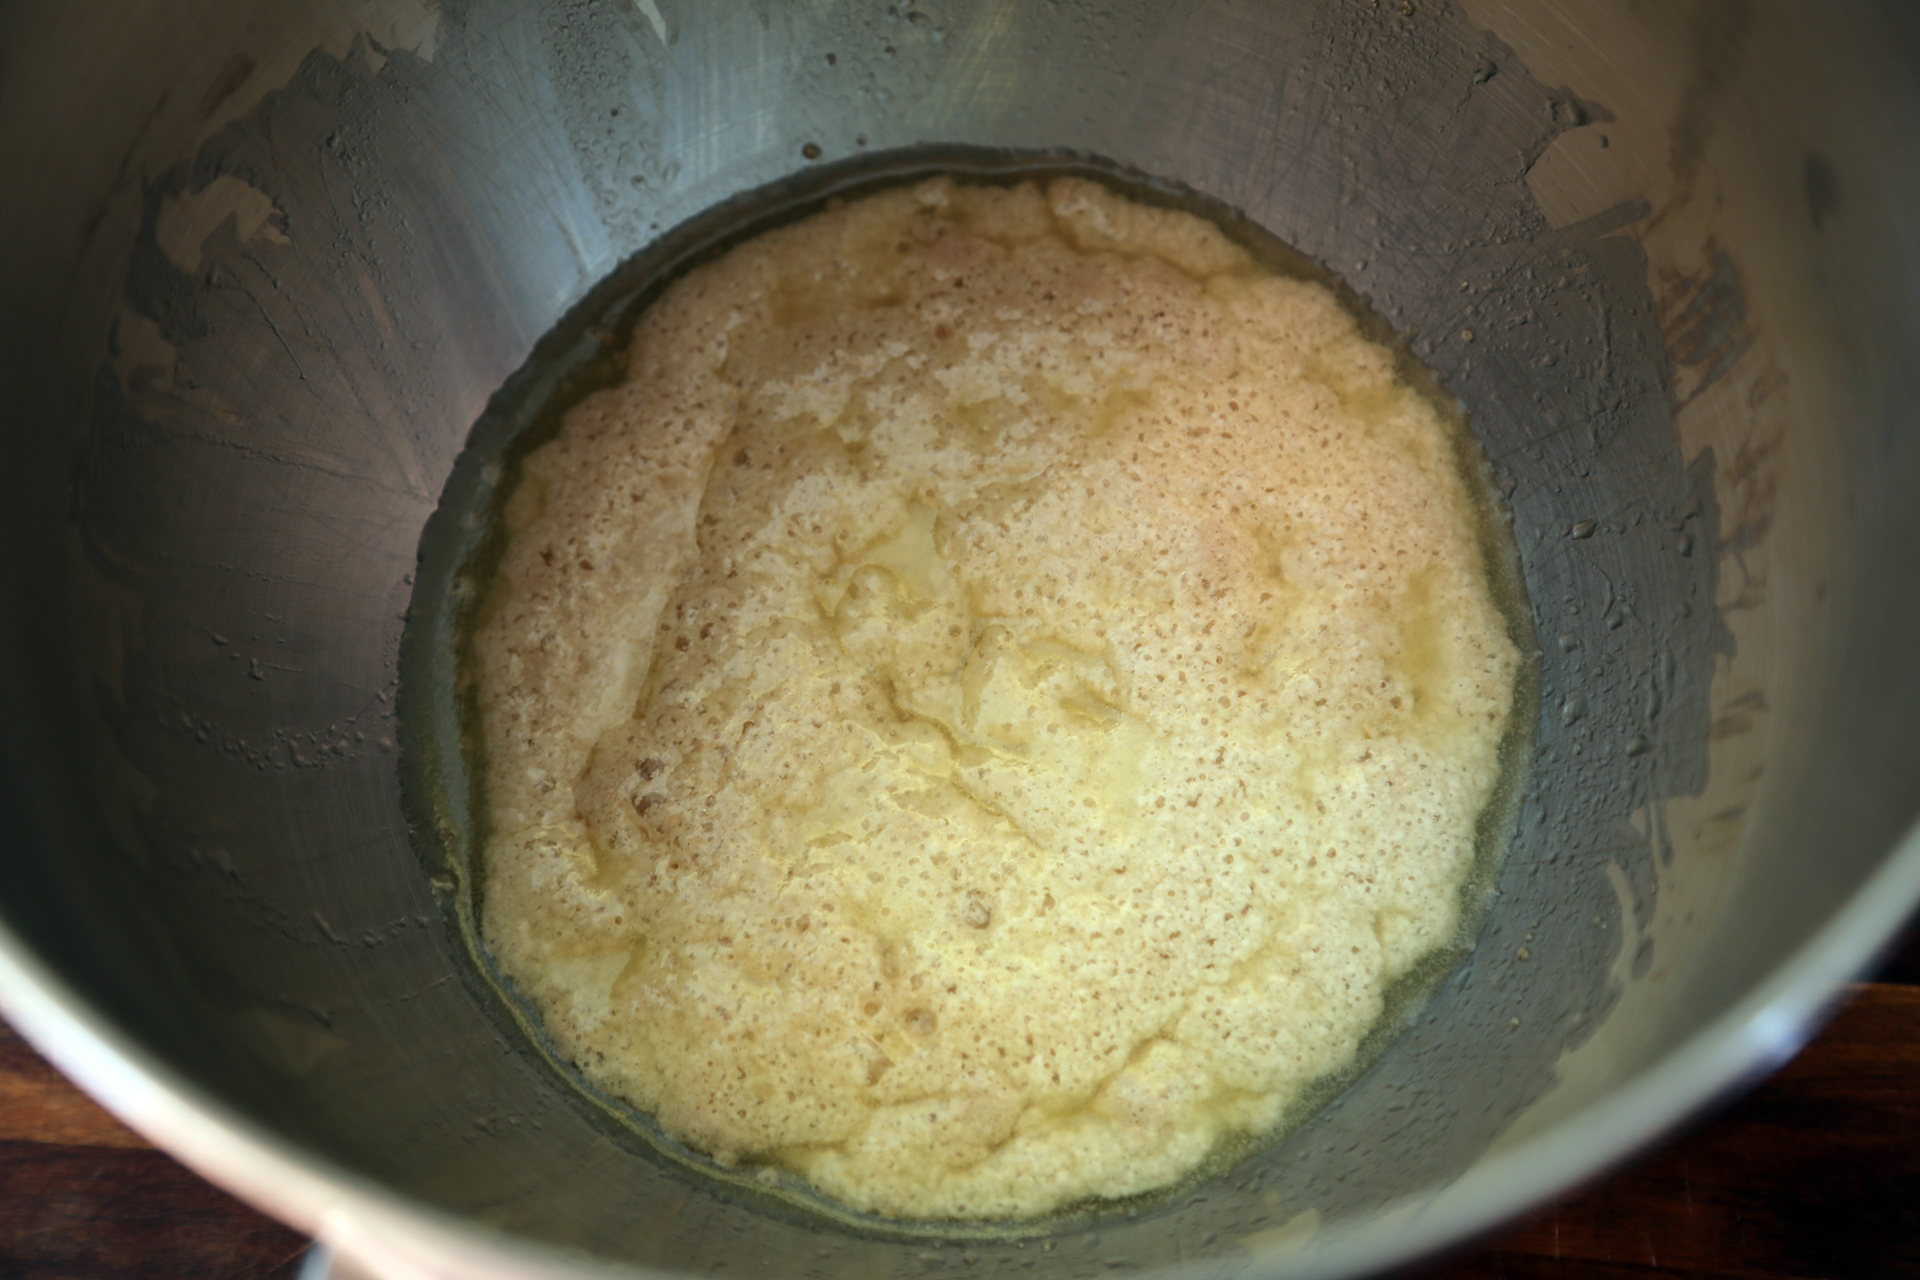 Stir in the yeast and let stand until foamy, about 5 minutes.